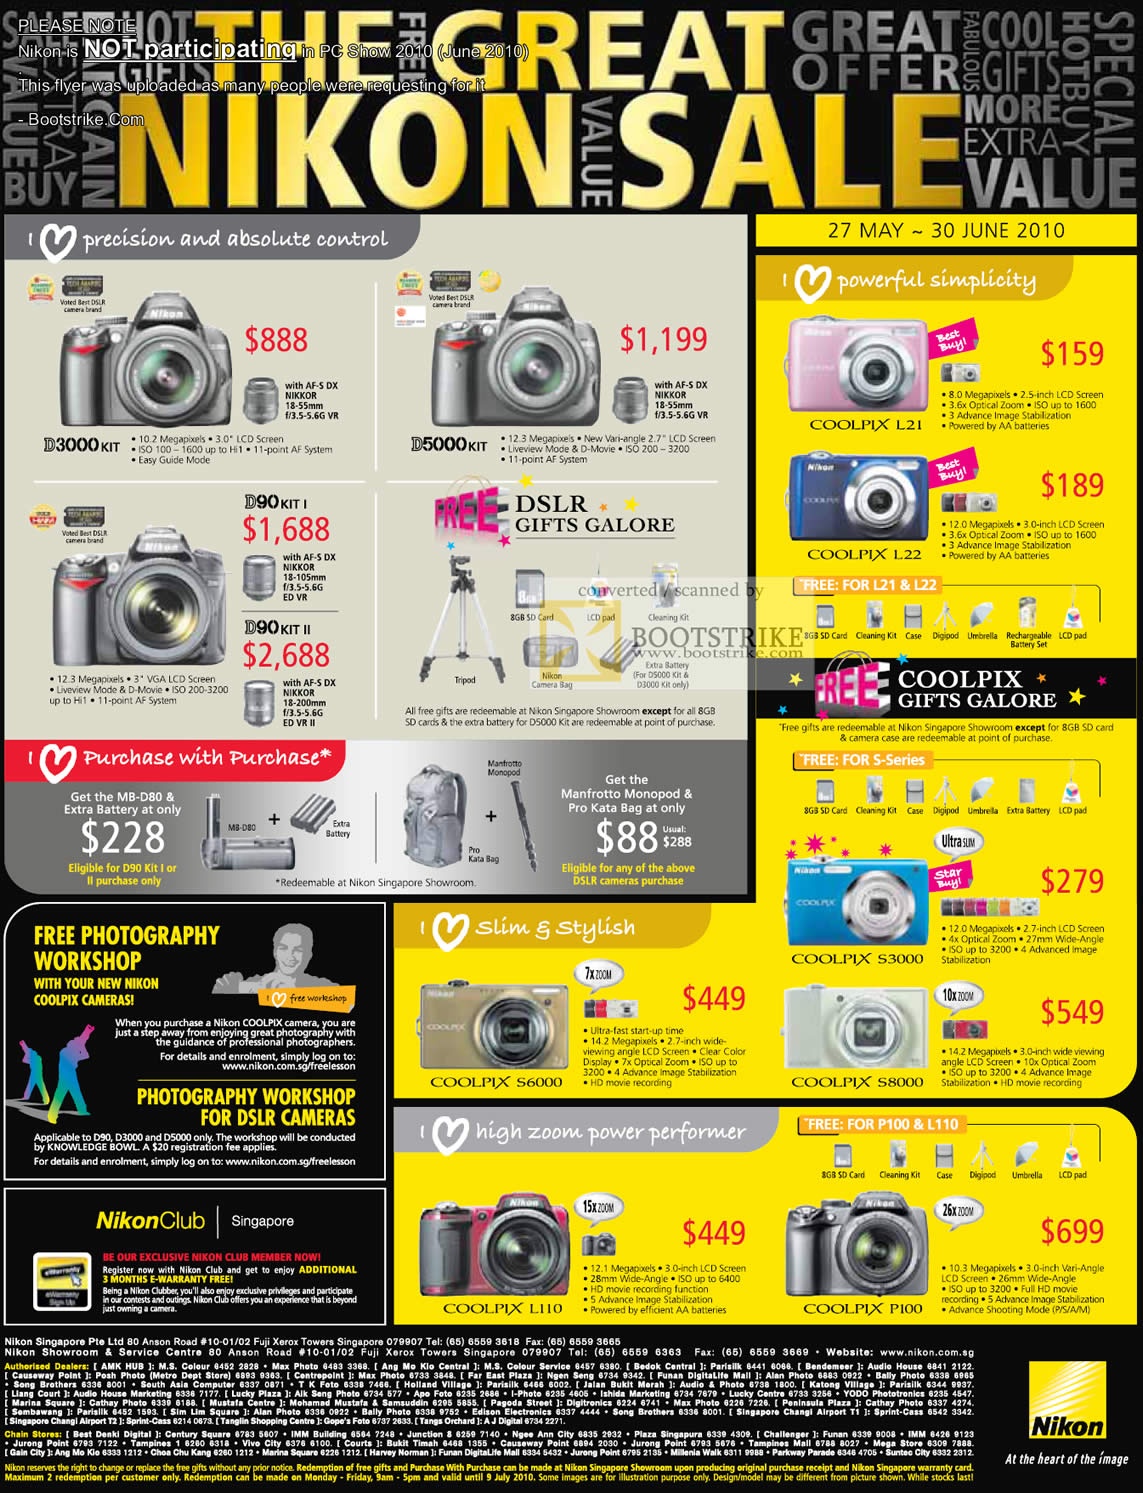 PC Show 2010 Scanned image brochure price list of Nikon NOT ...